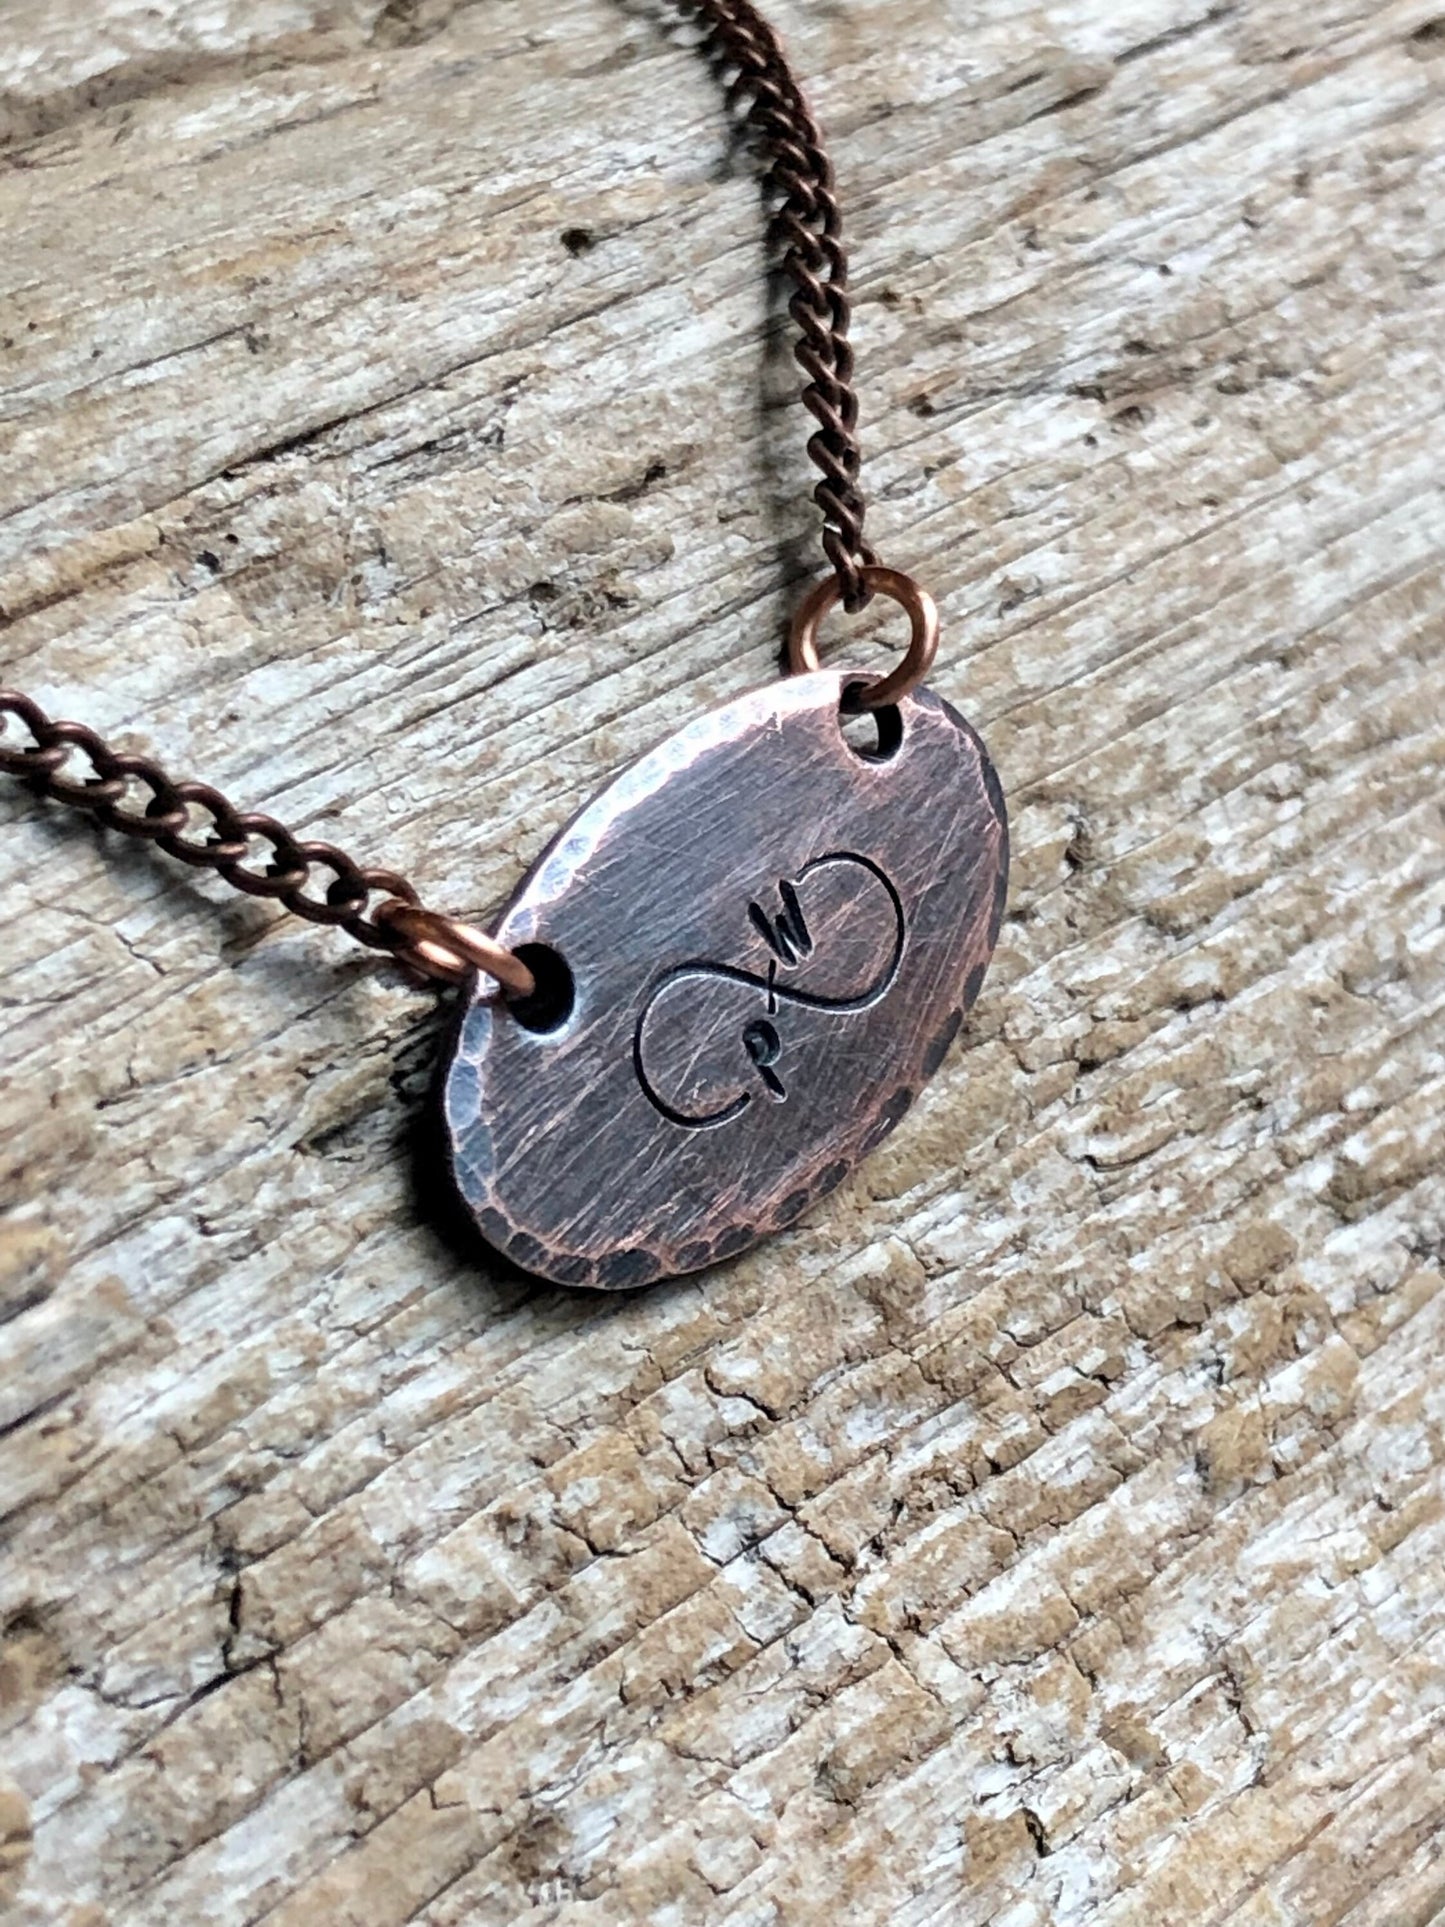 Infinity Sign Necklace - Anniversary Gift - Gift for Wife Girlfriend - 7th Anniversary Gift - Copper - Also in Silver and Bronze - Initials